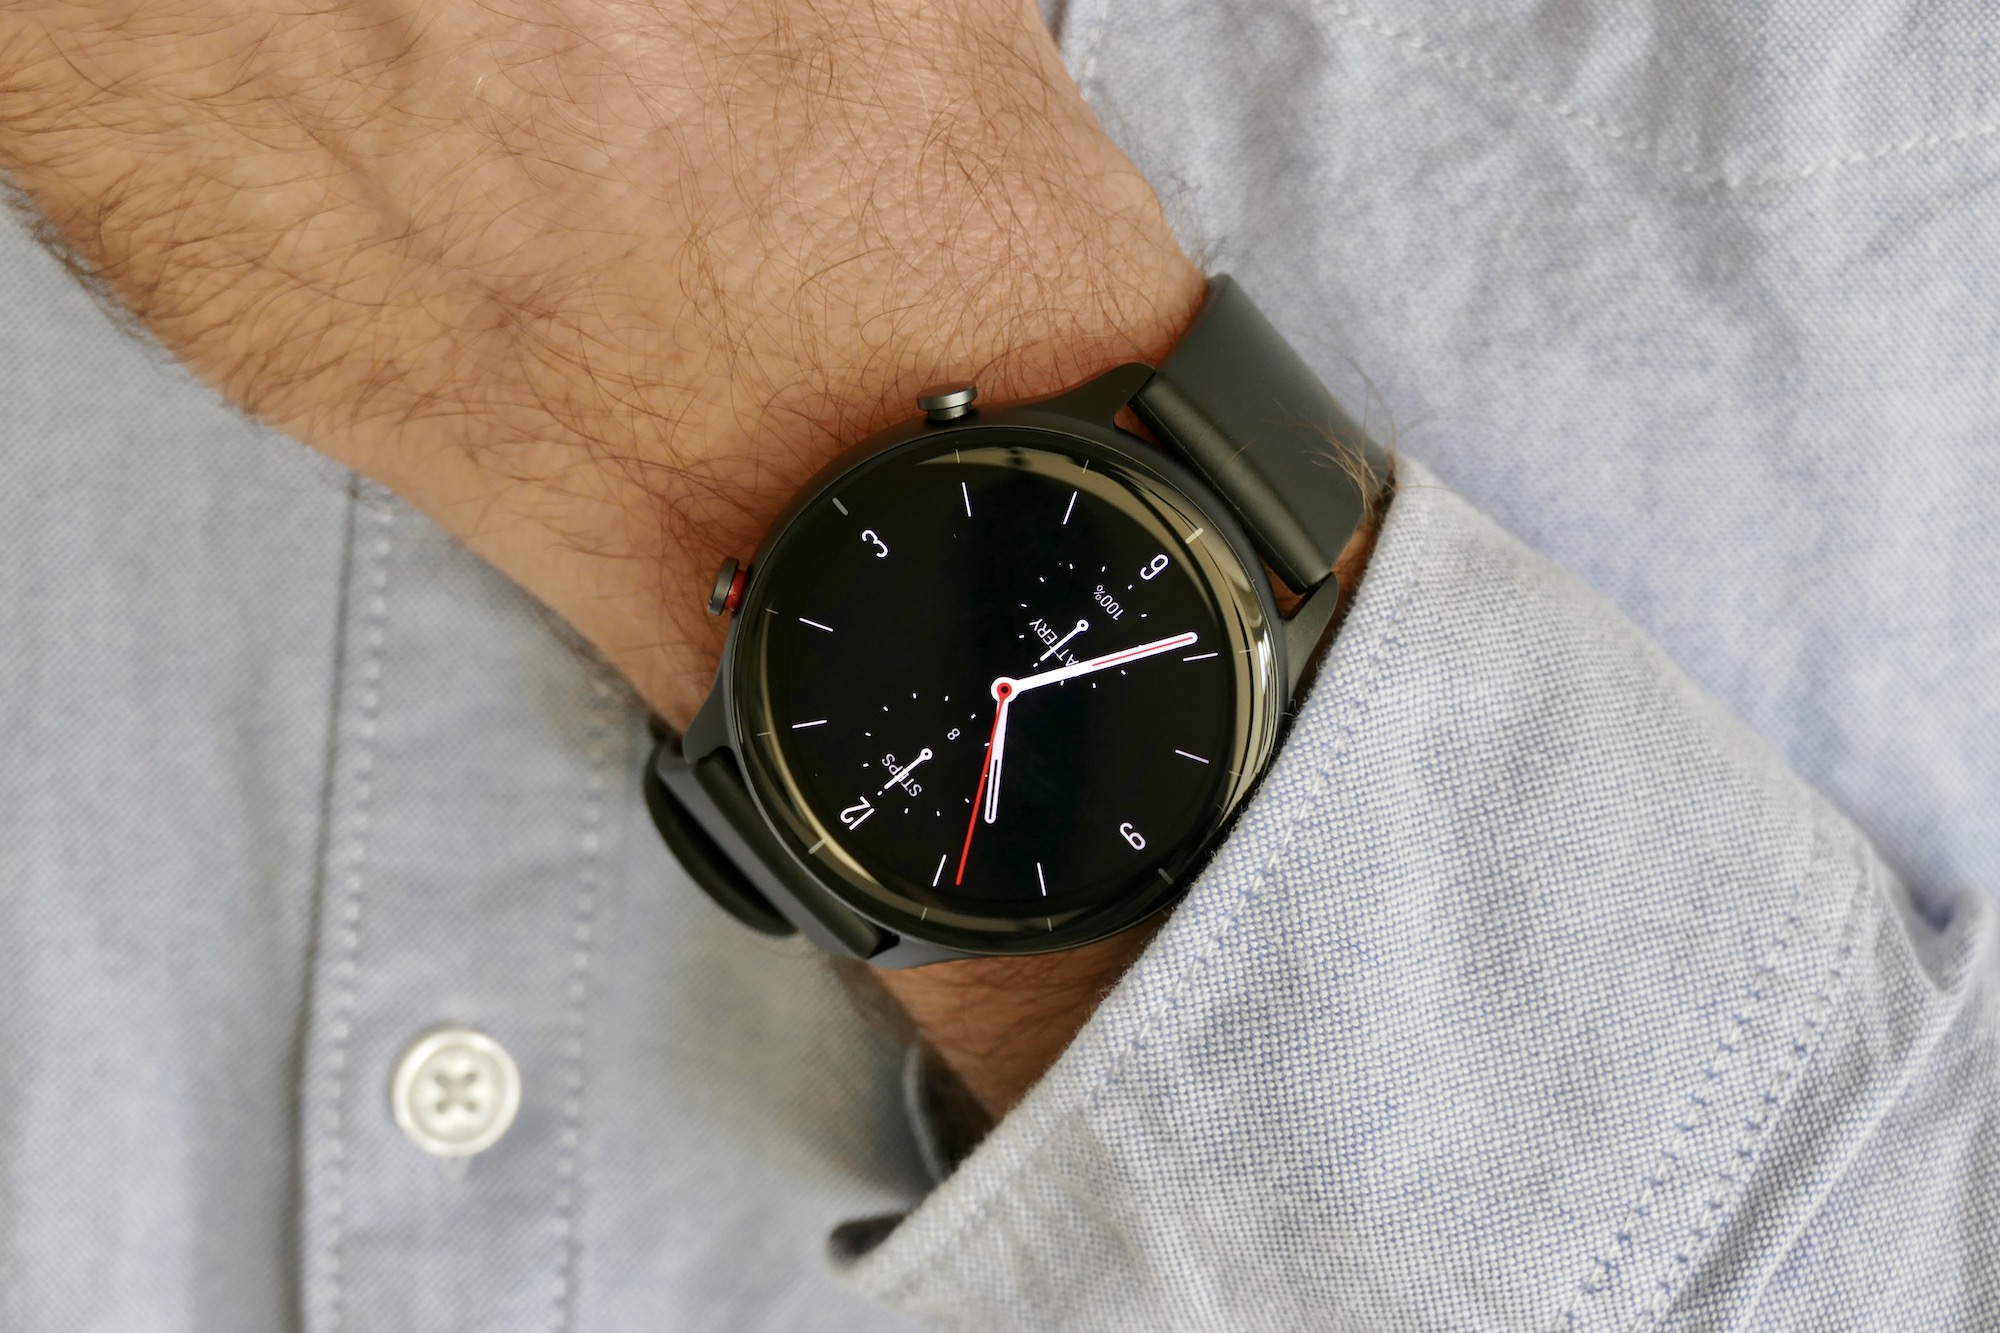 Review - Amazfit GTR Mini - The round and better version of the